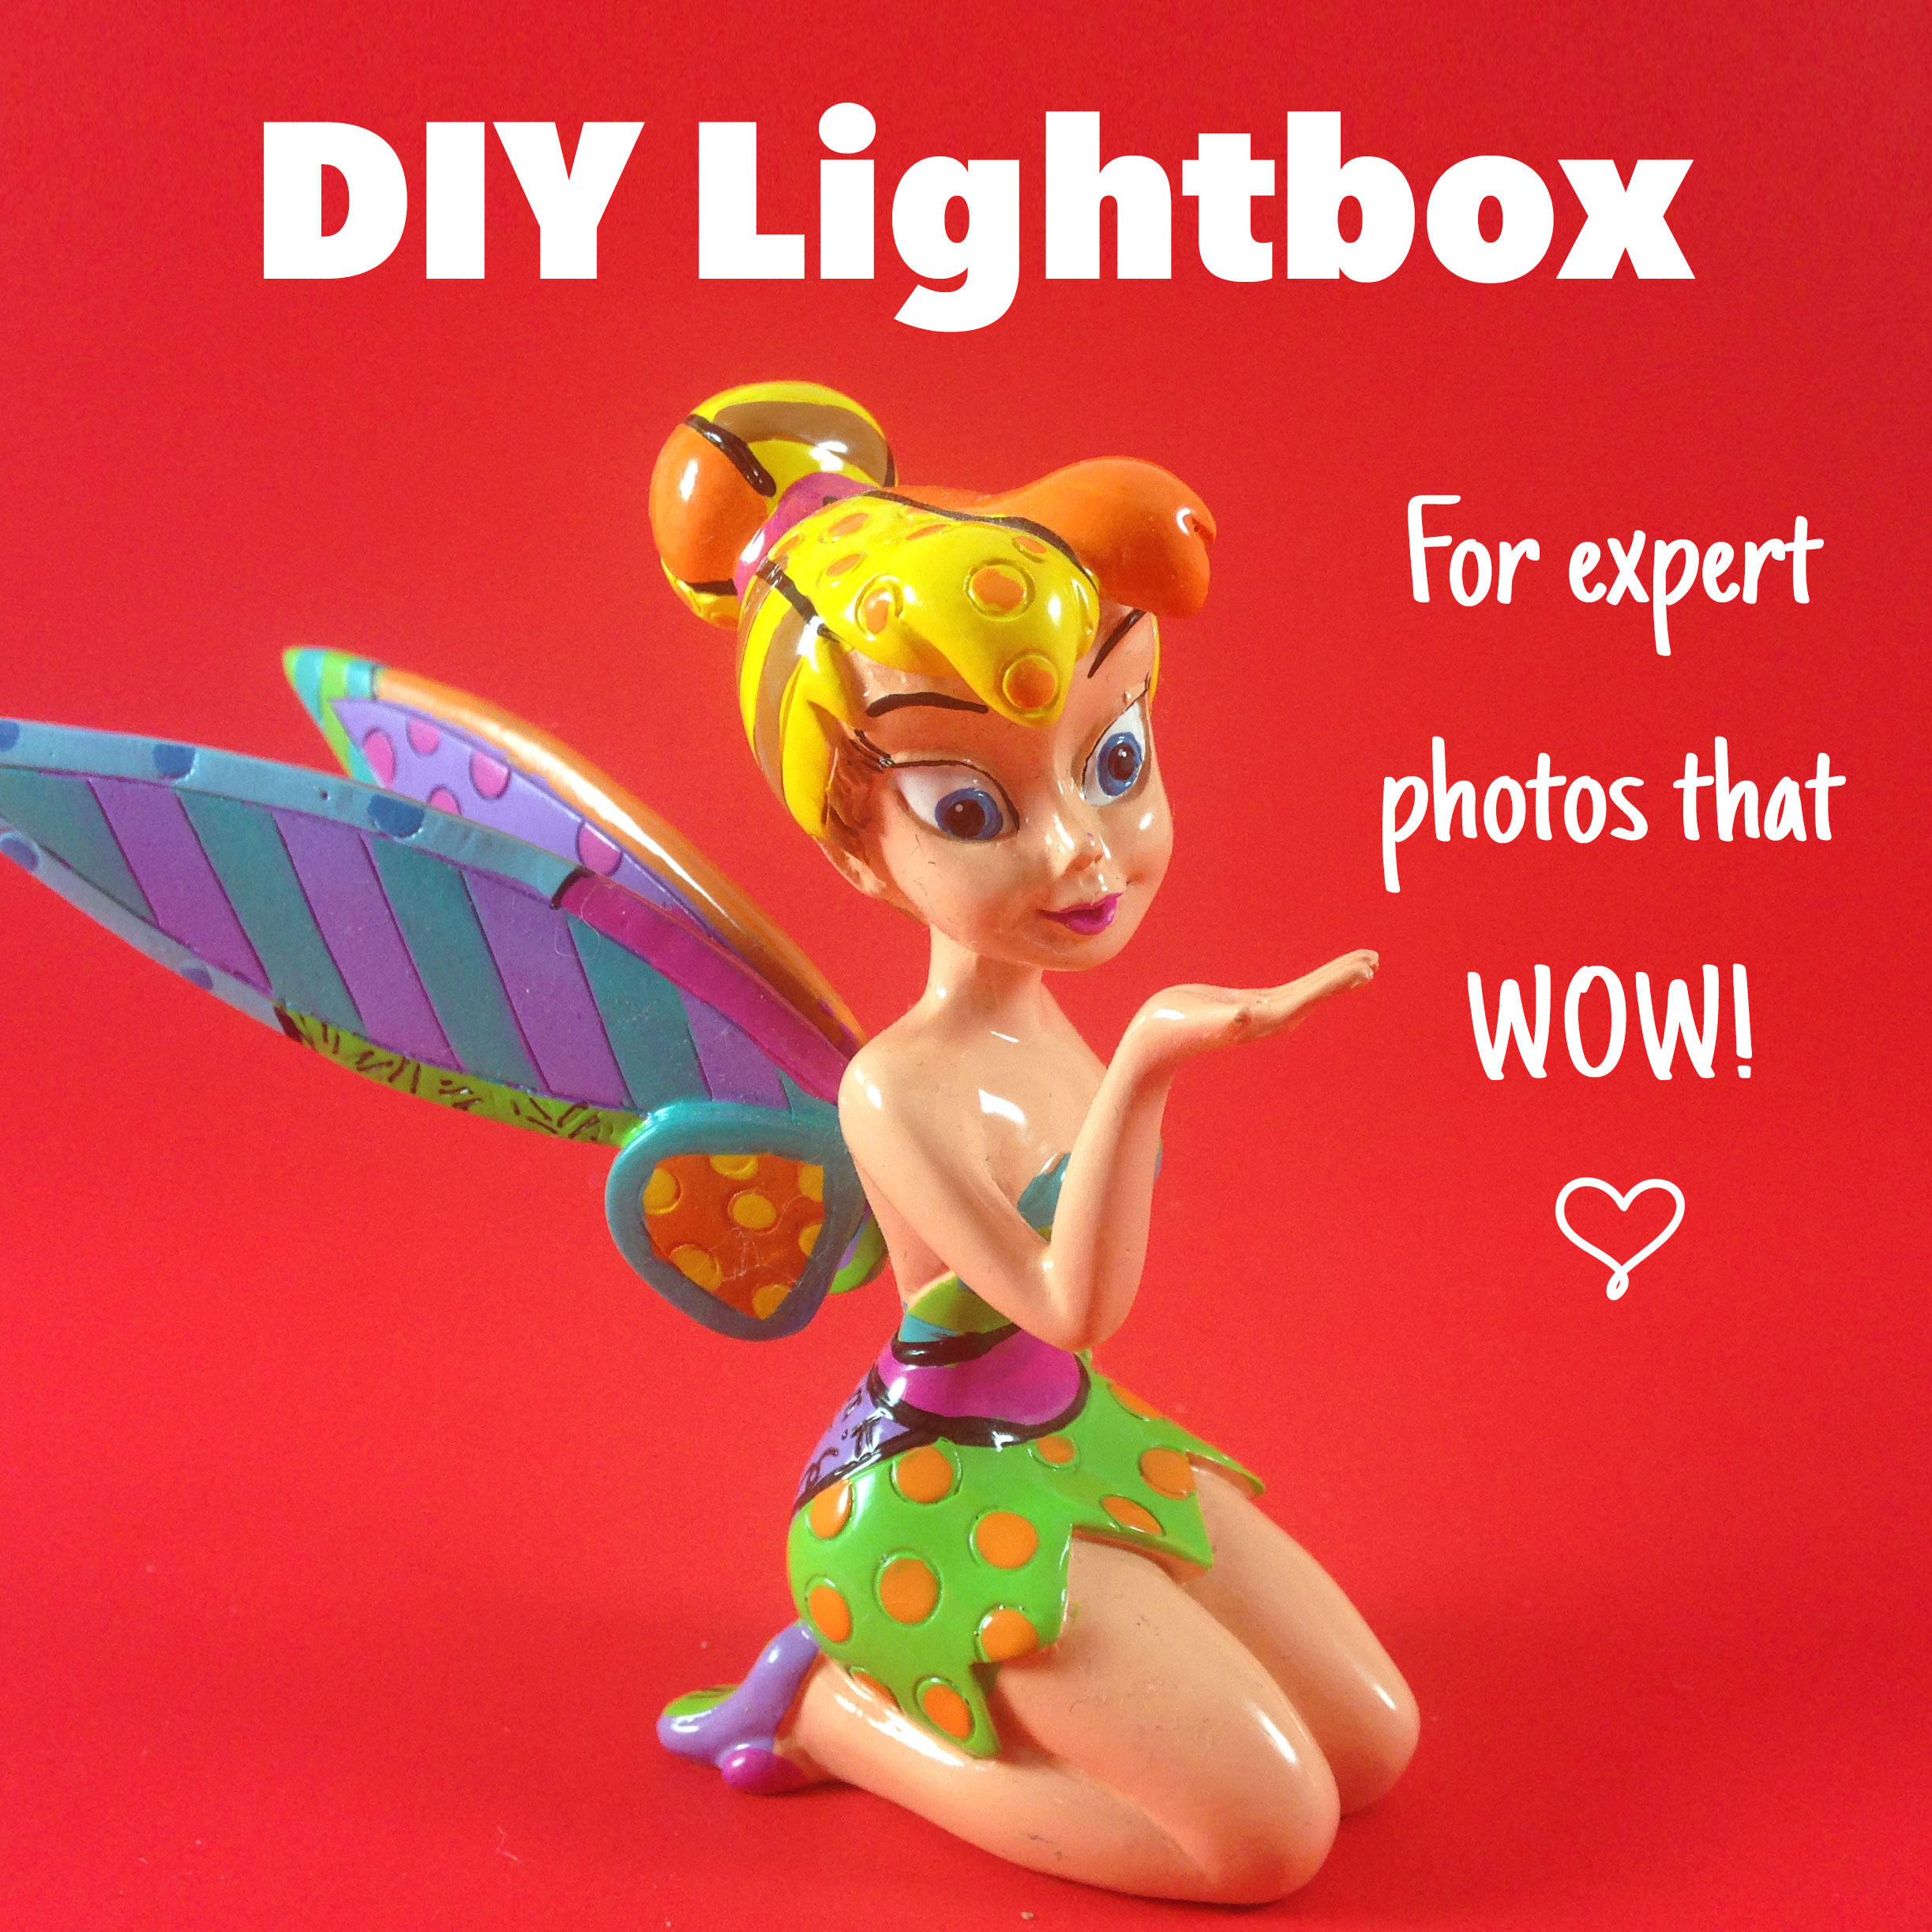 DIY Lightbox for Expert Photos that Wow! Step-by-Step Tutorial